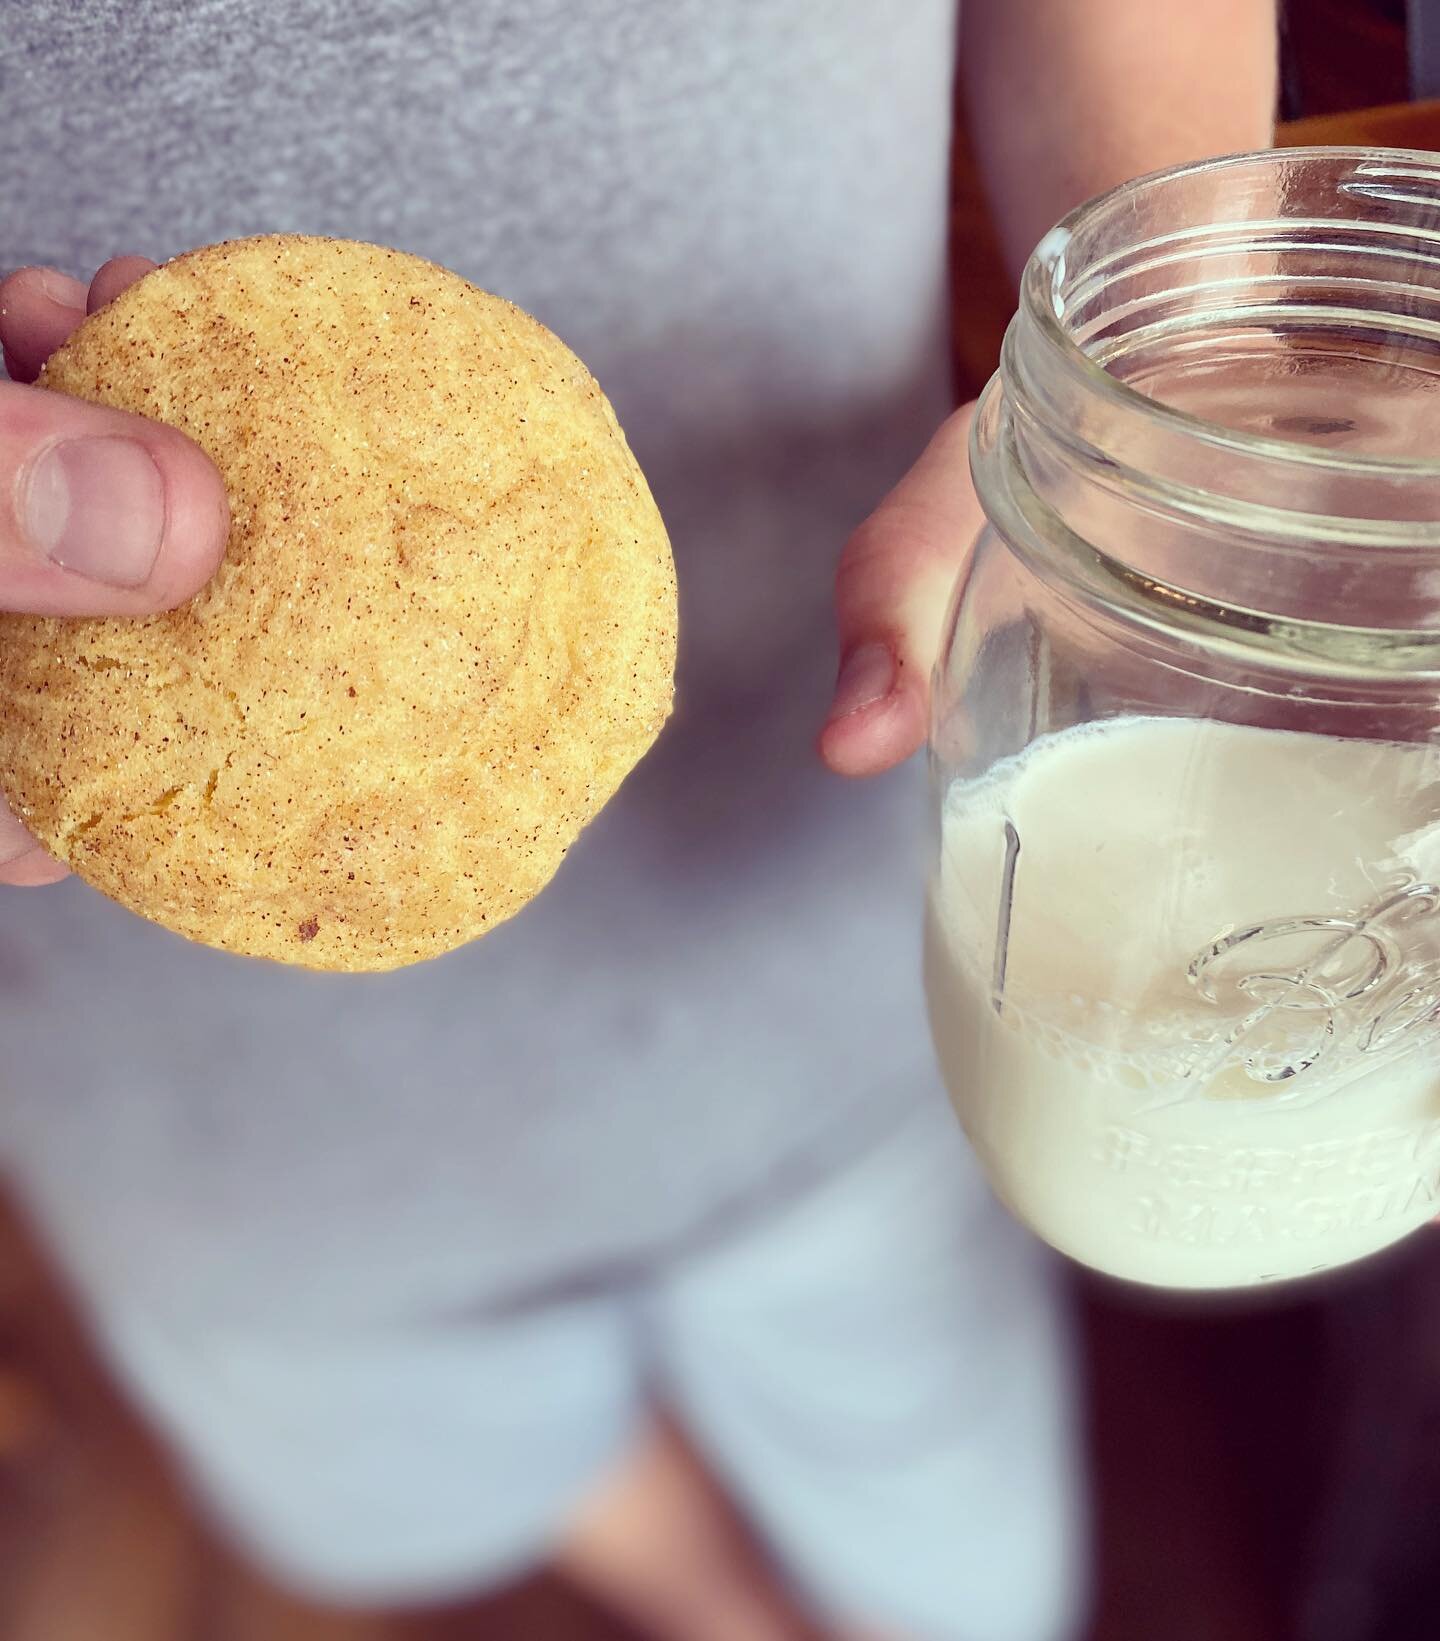 those math lessons getting frustrating? ..or tensions rising as the school routine gets into full swing? take a timeout and bake up some fall goodness, nothing soothes 😖 like a warm cookie and glass of milk...bonus points if you bake with a child 🍪